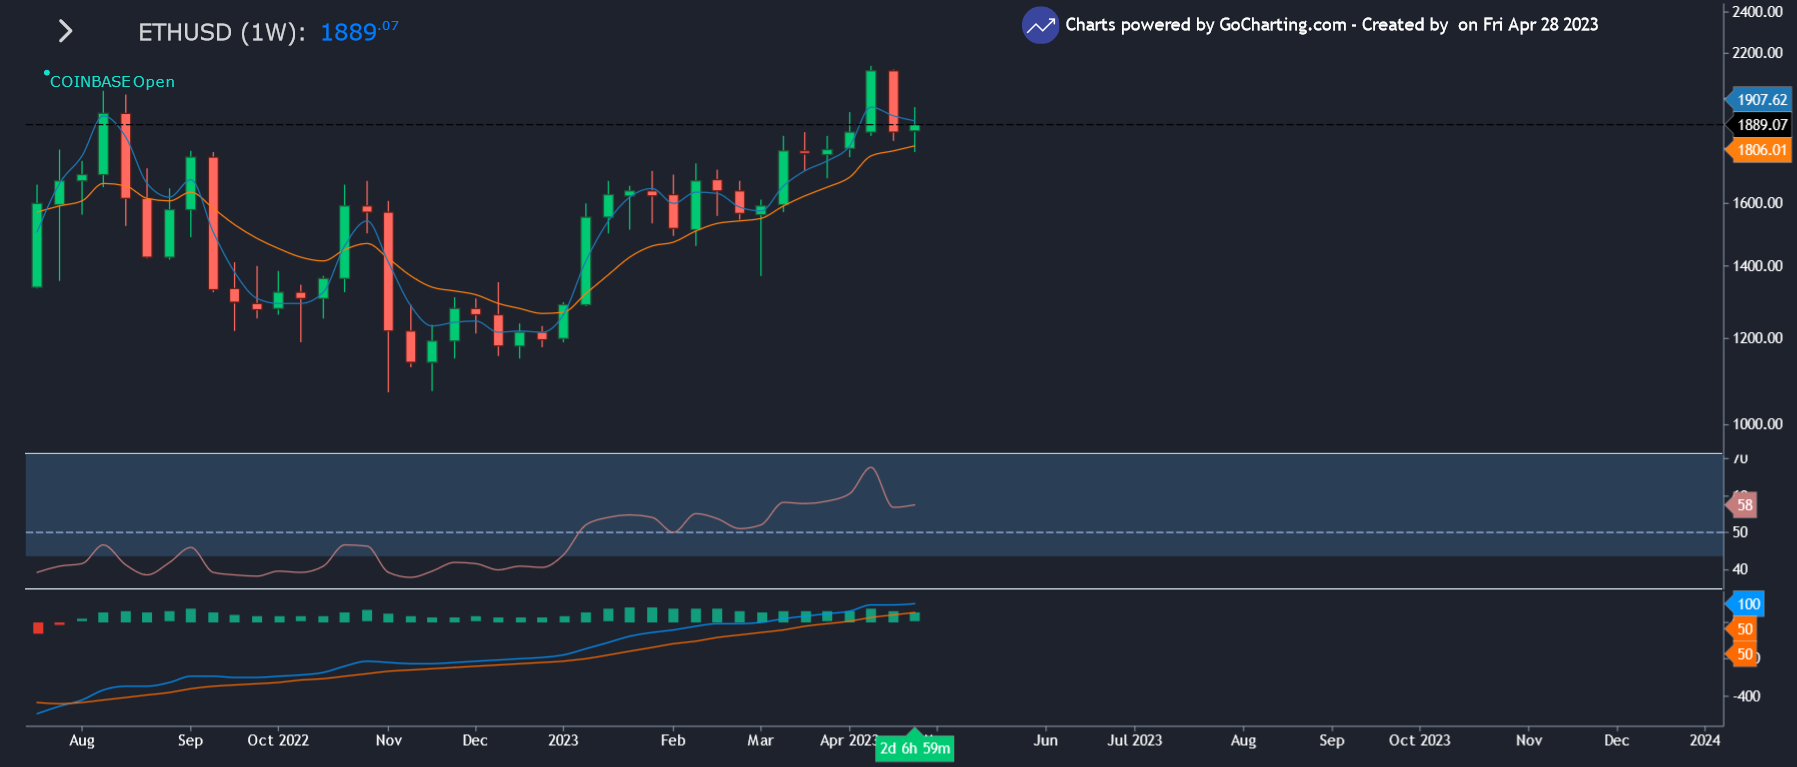 May 2023 Ethereum Price Forecast: ETH/USD Weekly chart showing the price – GoCharting